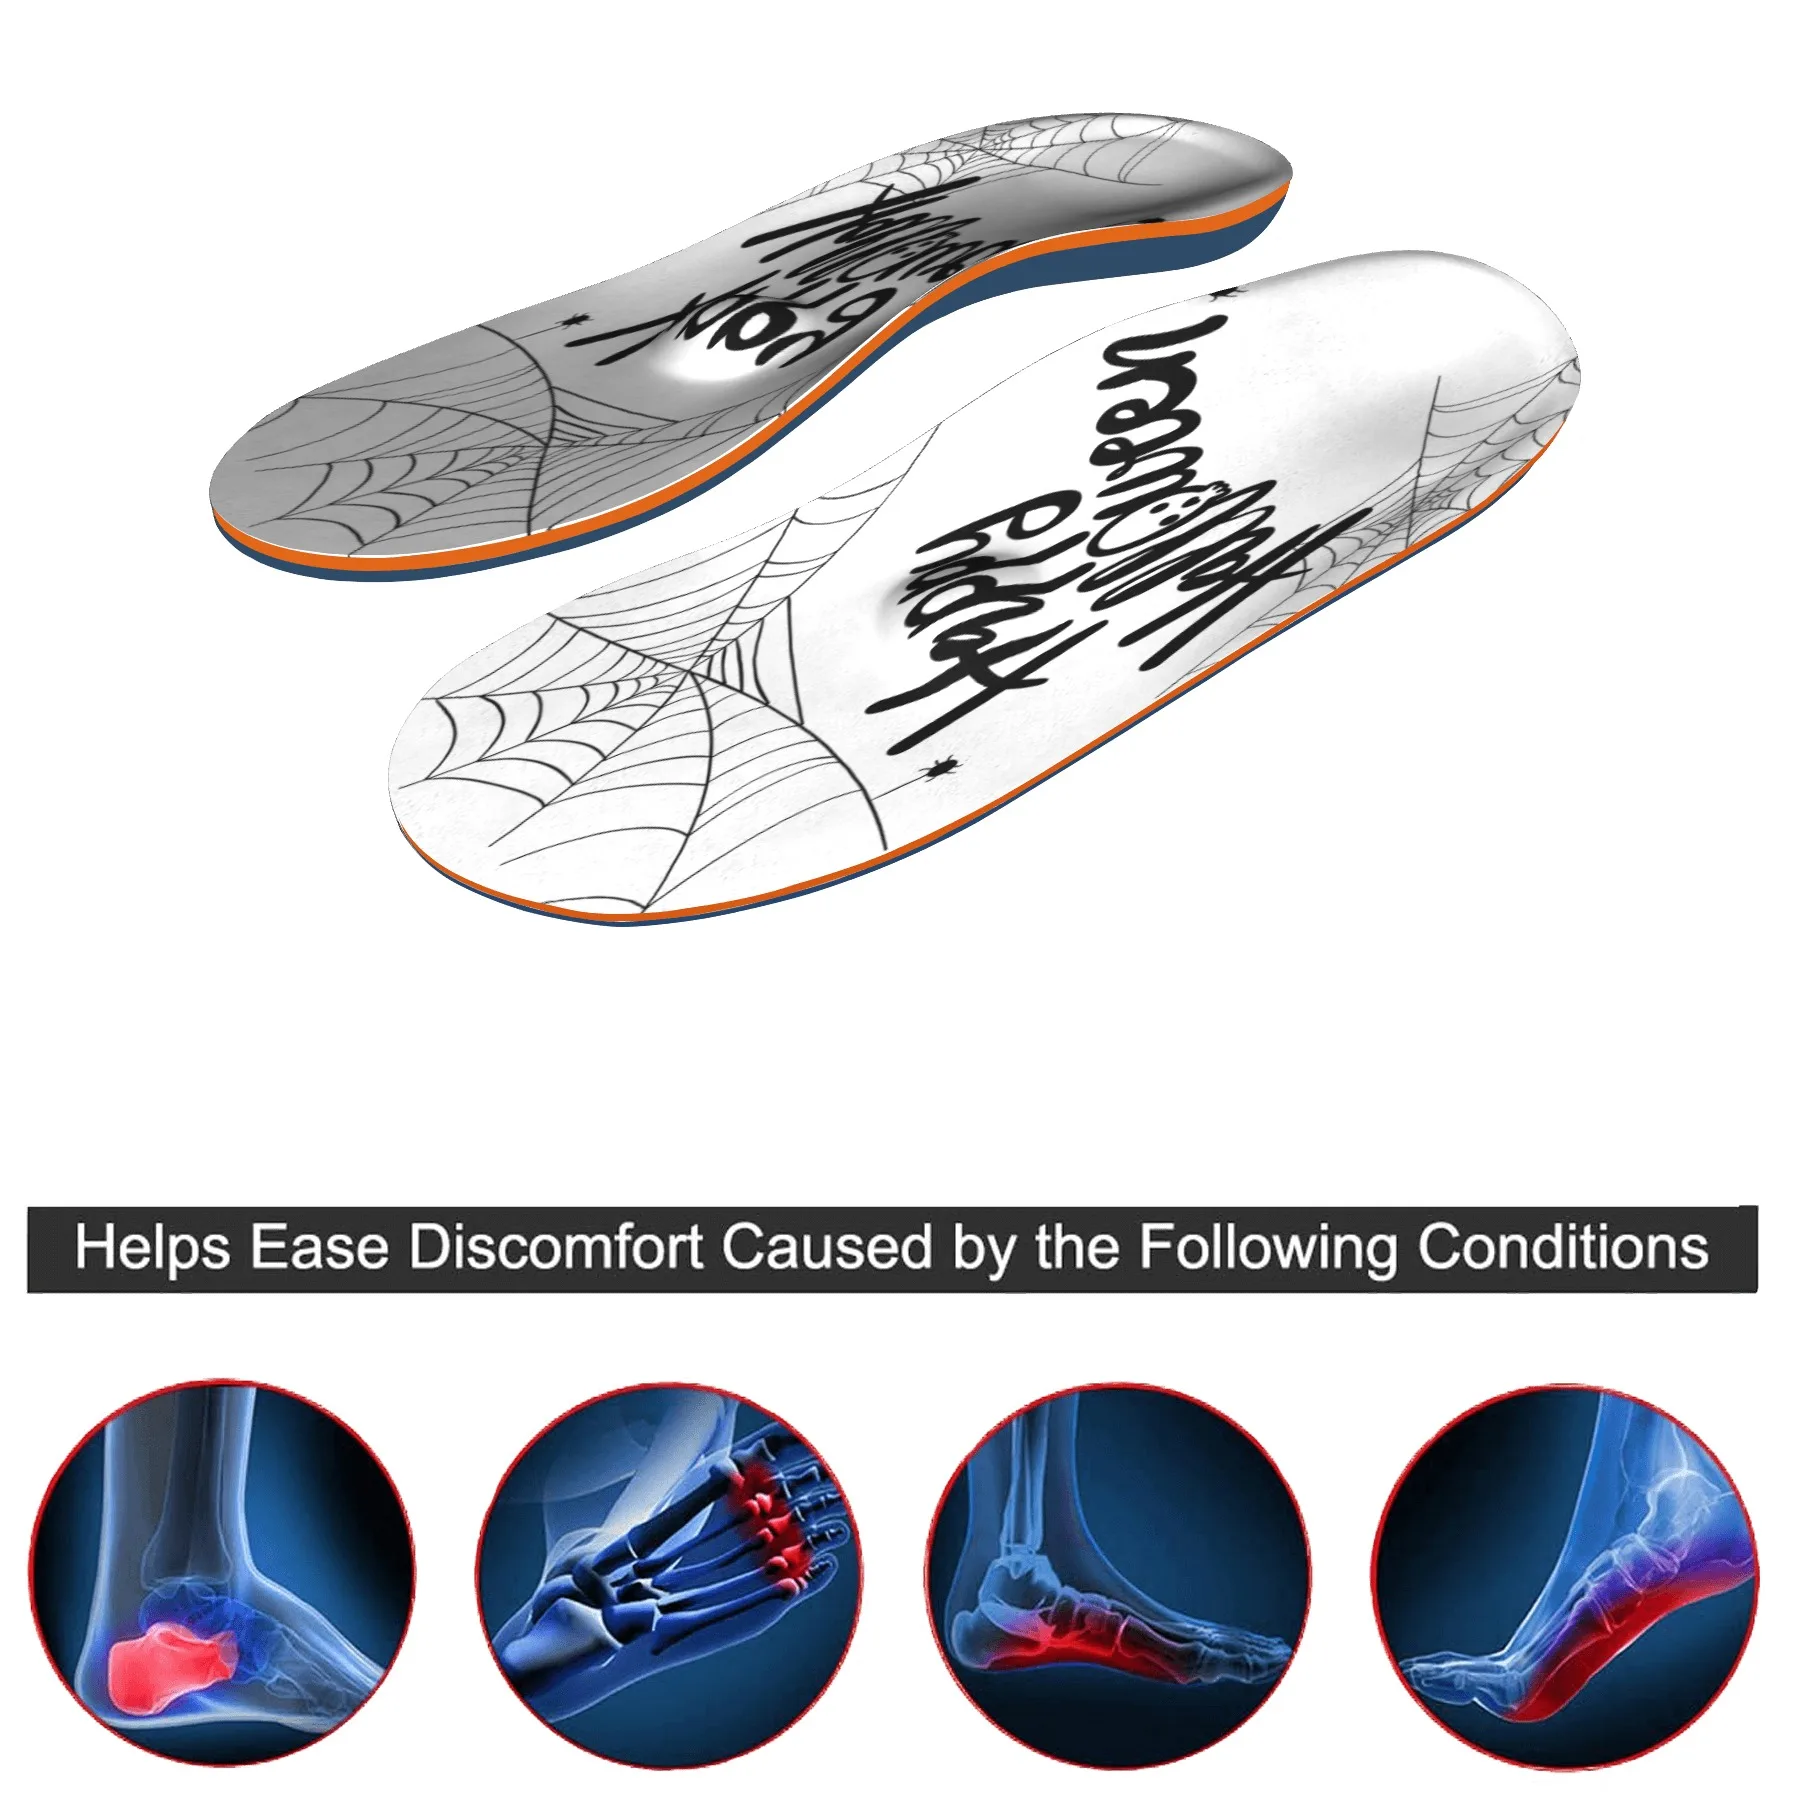 Halloween non-slip orthopedic comfort flat plantar fasciitis arch support orthopedic insoles for men and women